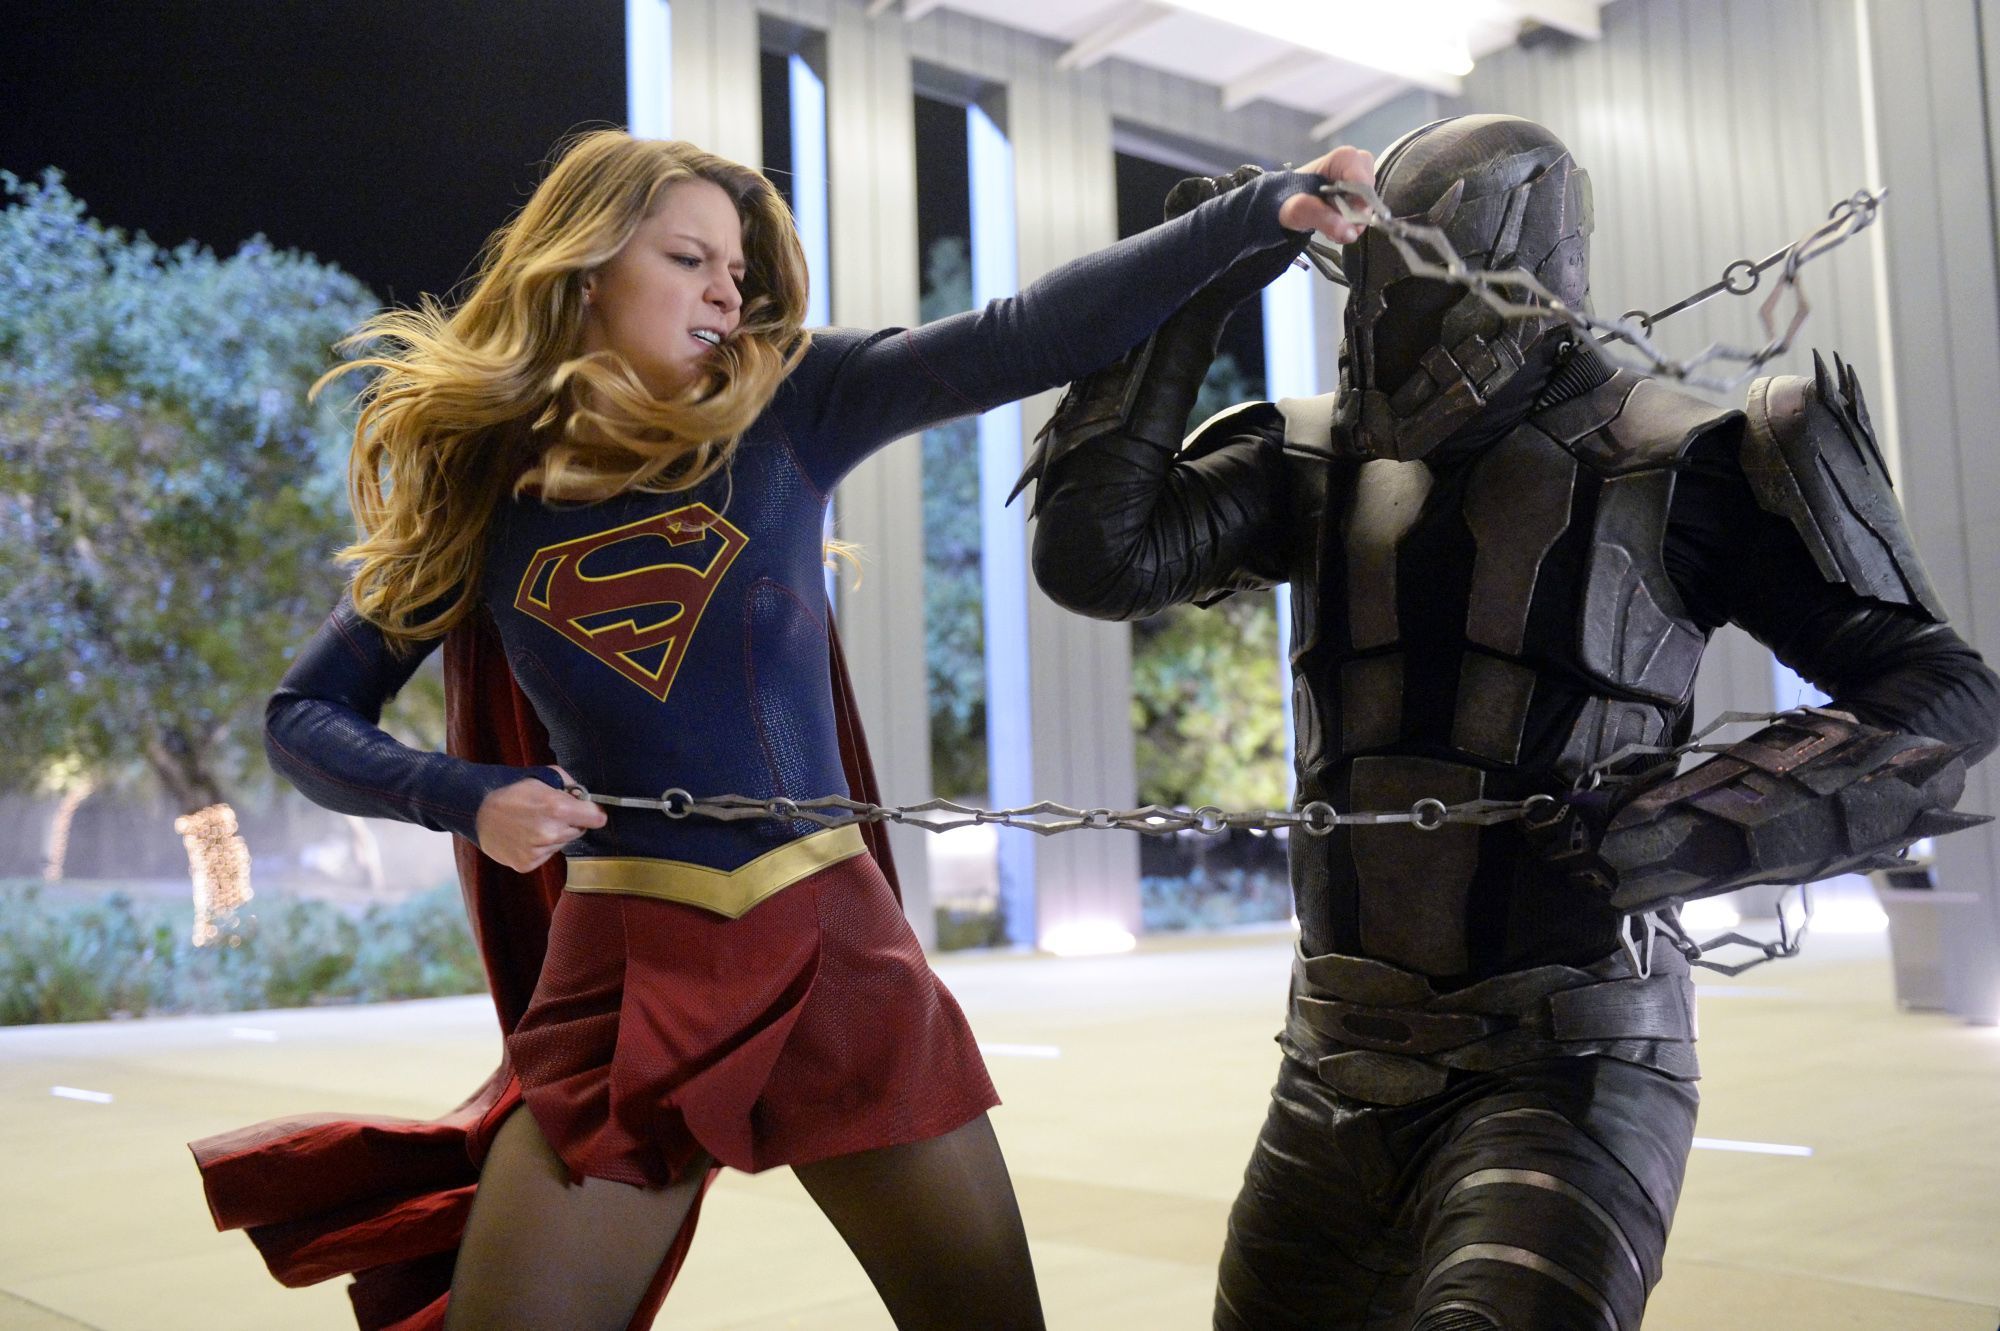 Melissa Benoist (left) and Jeff Branson appear in a scene from “Supergirl.” The CW is picking up the series from CBS, where it debuted last year. It will air on Mondays, starting in the fall.